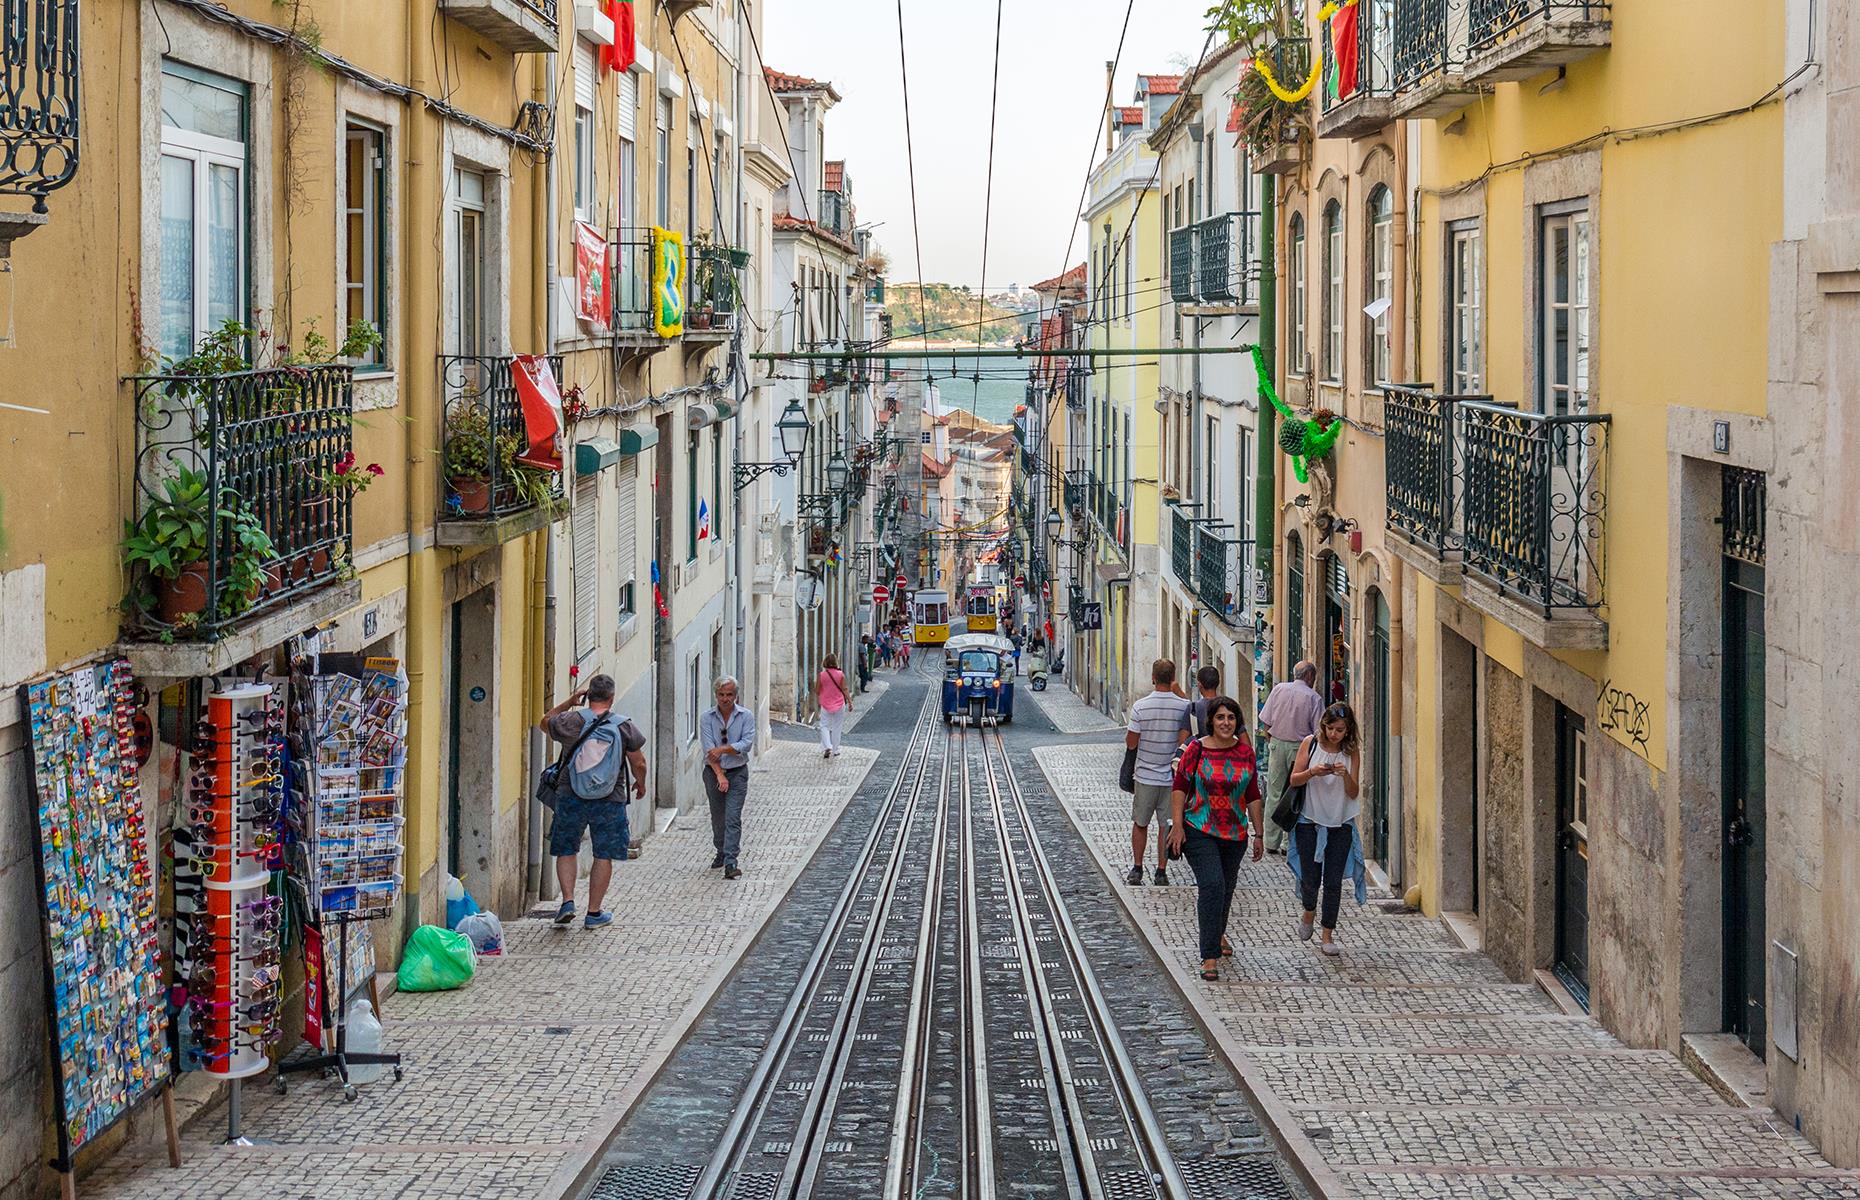 <p>Portugal’s capital has an enchanting old town, filled with cobbled streets and vintage trams that trundle through its historic quarter. <a href="https://www.loveexploring.com/guides/69830/what-to-do-in-lisbon-tourist-attractions">Lisbon</a>’s layout harks back to its Moorish past, with narrow lanes and twisting alleyways. The old town is one of the liveliest parts of the city, with plenty of restaurants and bars where you can listen to the haunting sounds of fado, Portugal's Unesco-inscribed traditional music.</p>